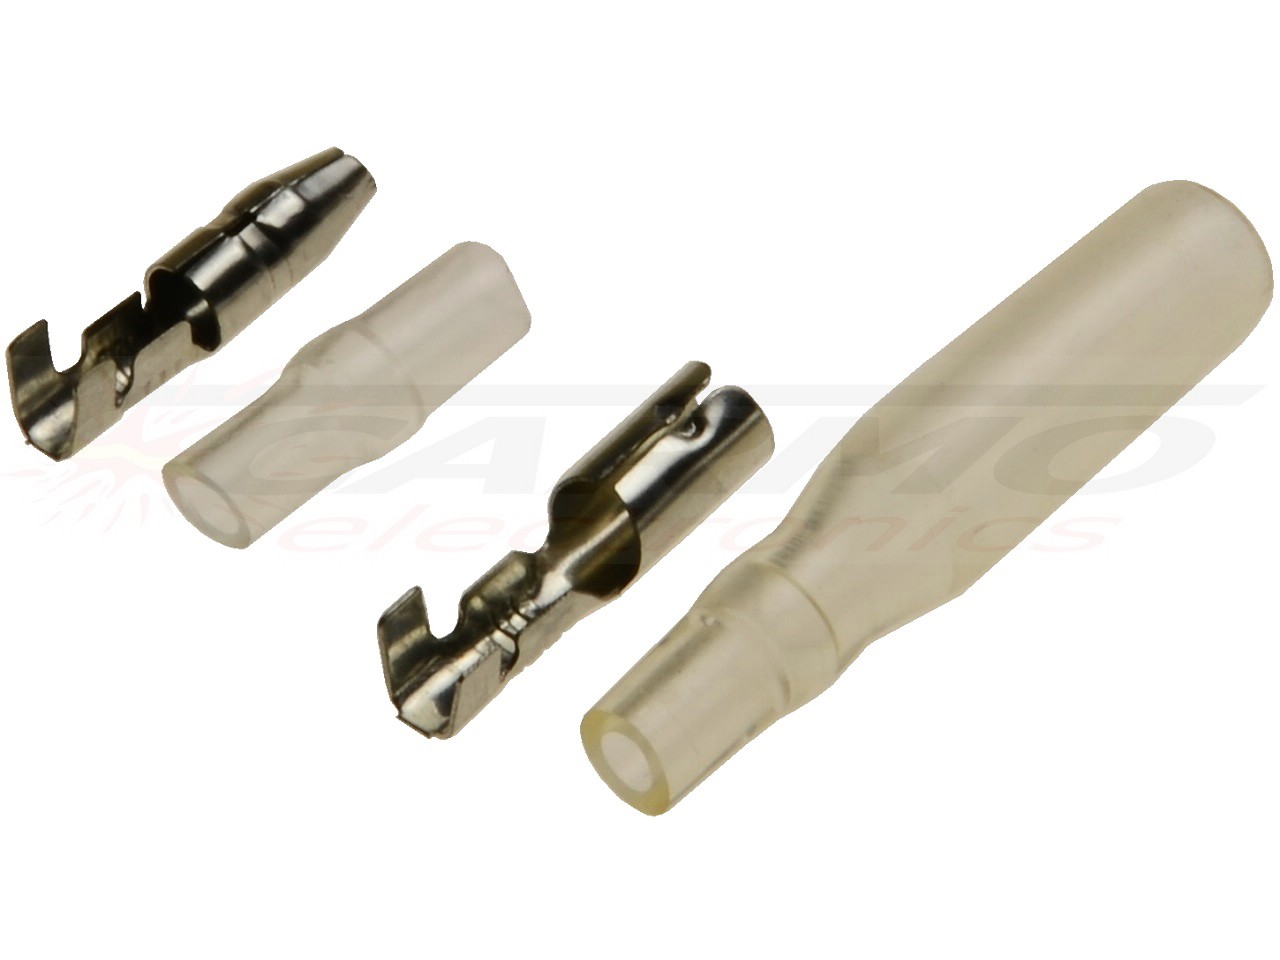 3.9mm round Bullet connector set - Click Image to Close